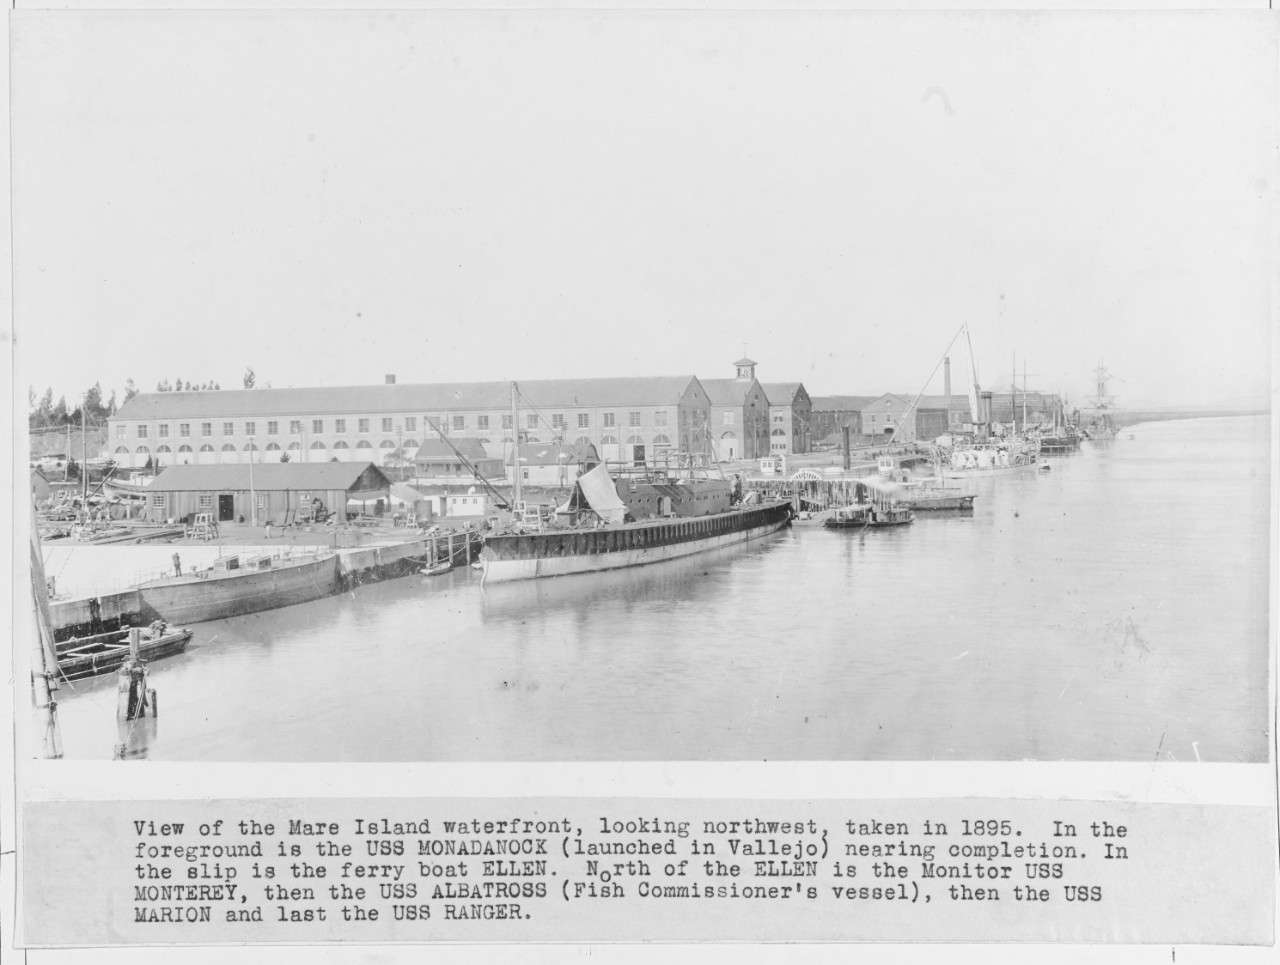 Waterfront of Mare Island Navy Yard, California, in 1895. 